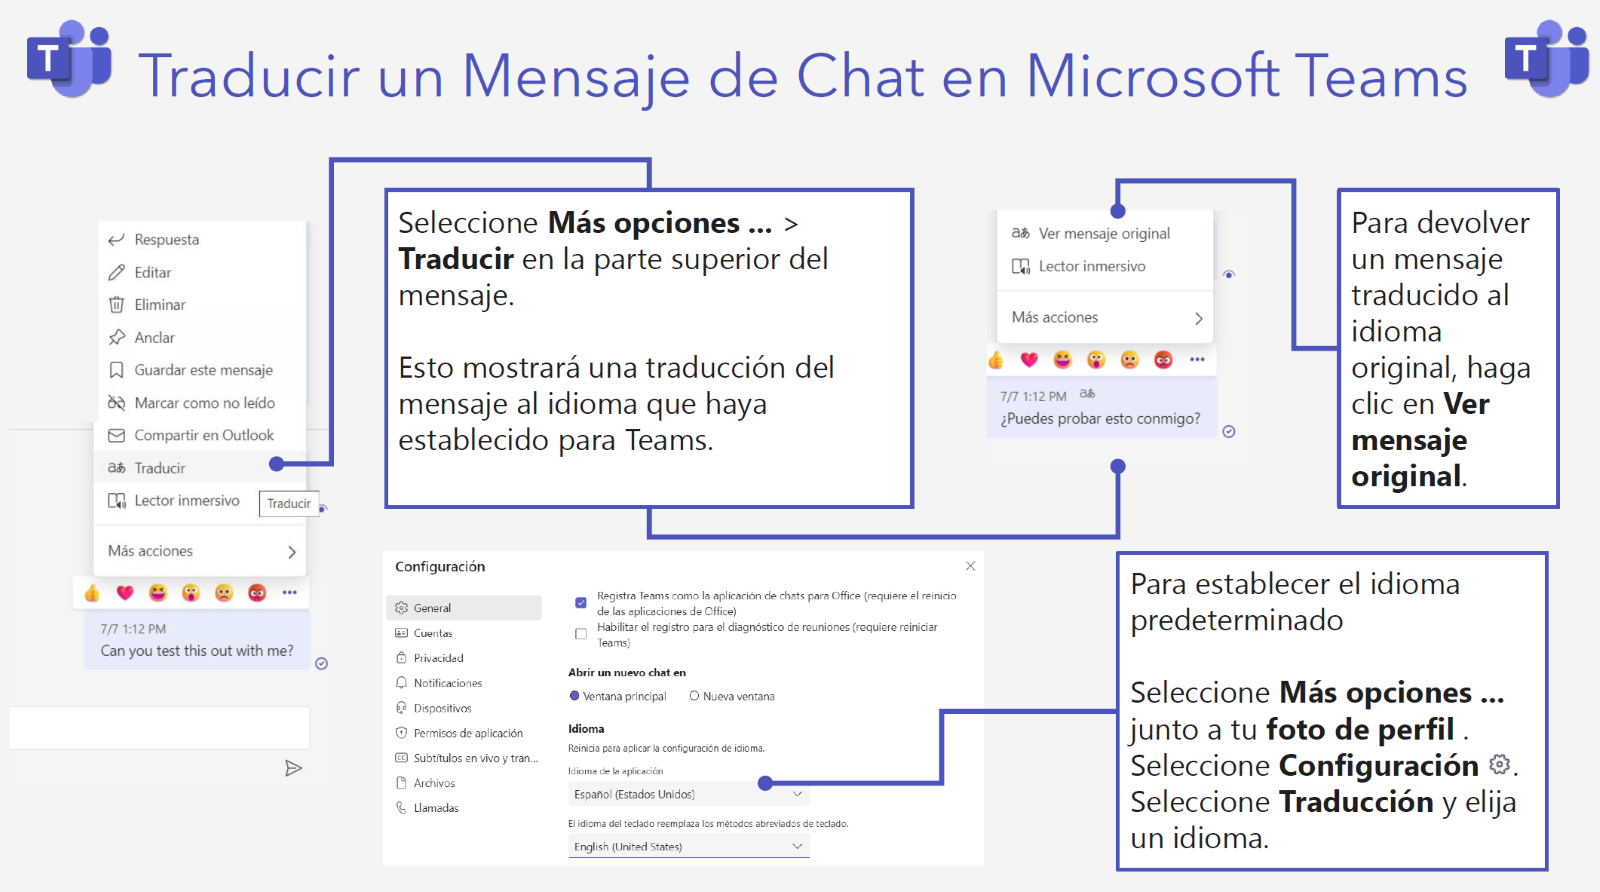 Translating a Chat Message from Spanish to English in Microsoft Teams